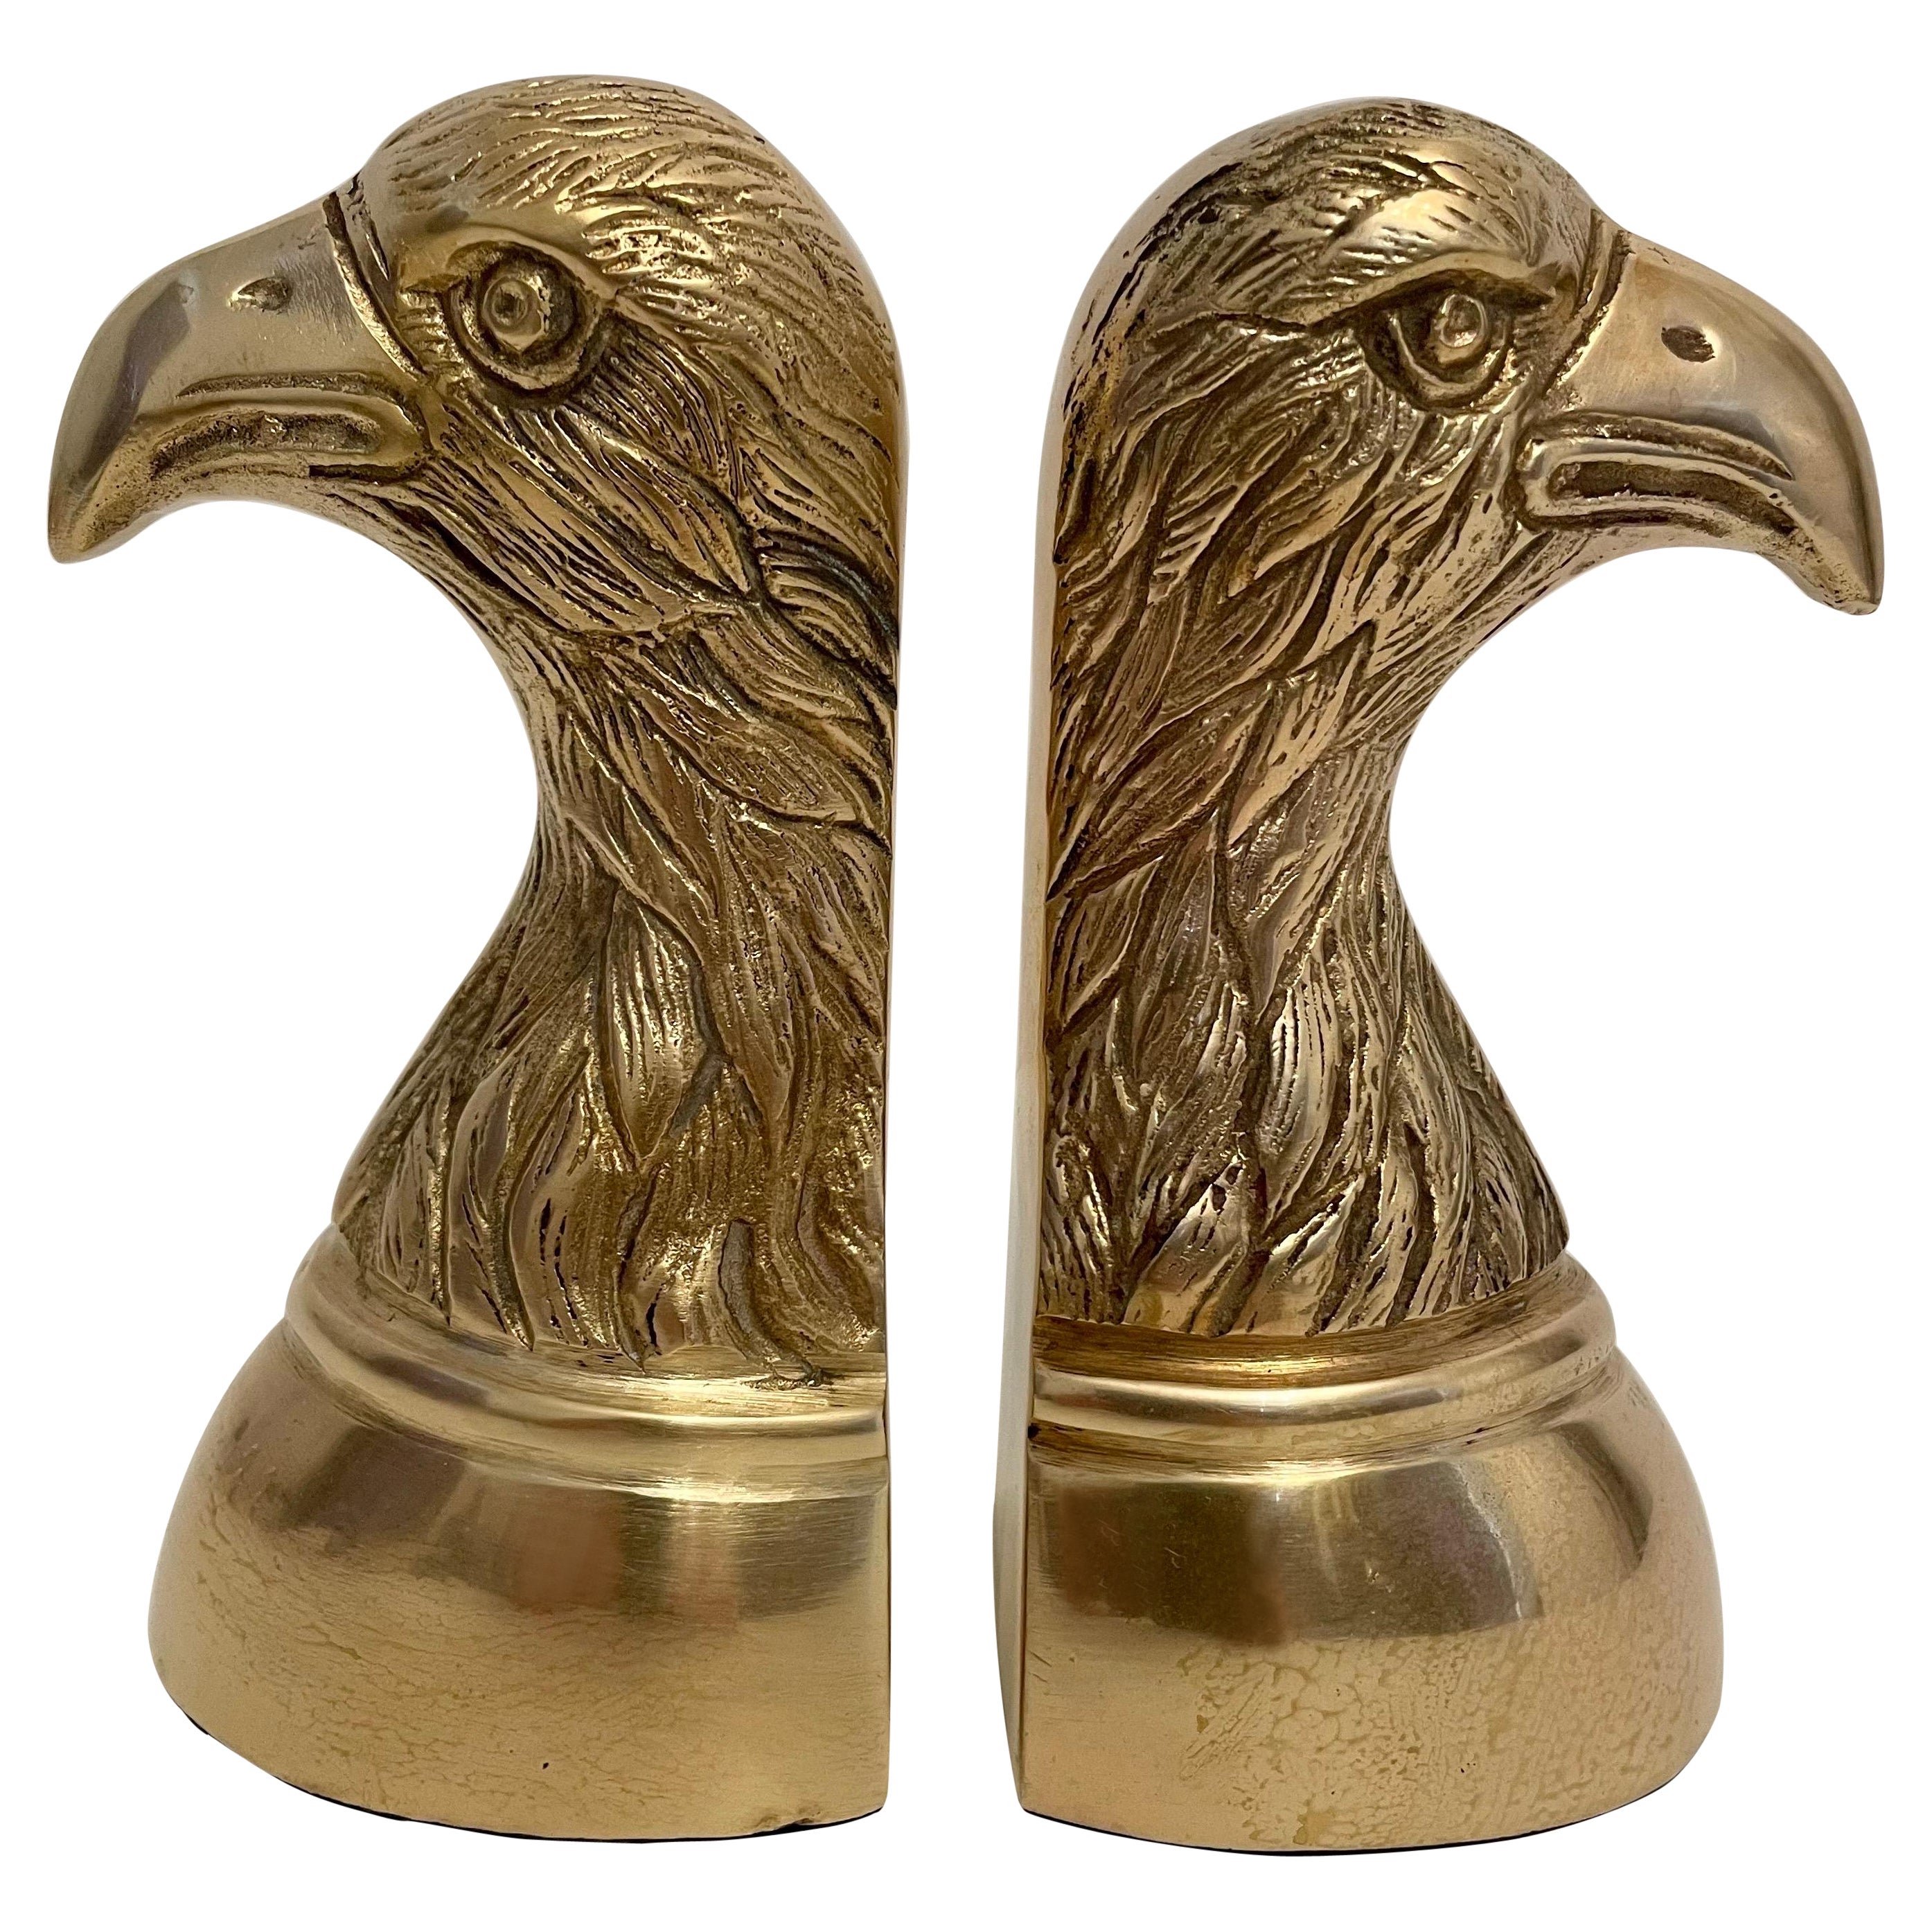 Pair of Vintage Brass Eagle Bookends